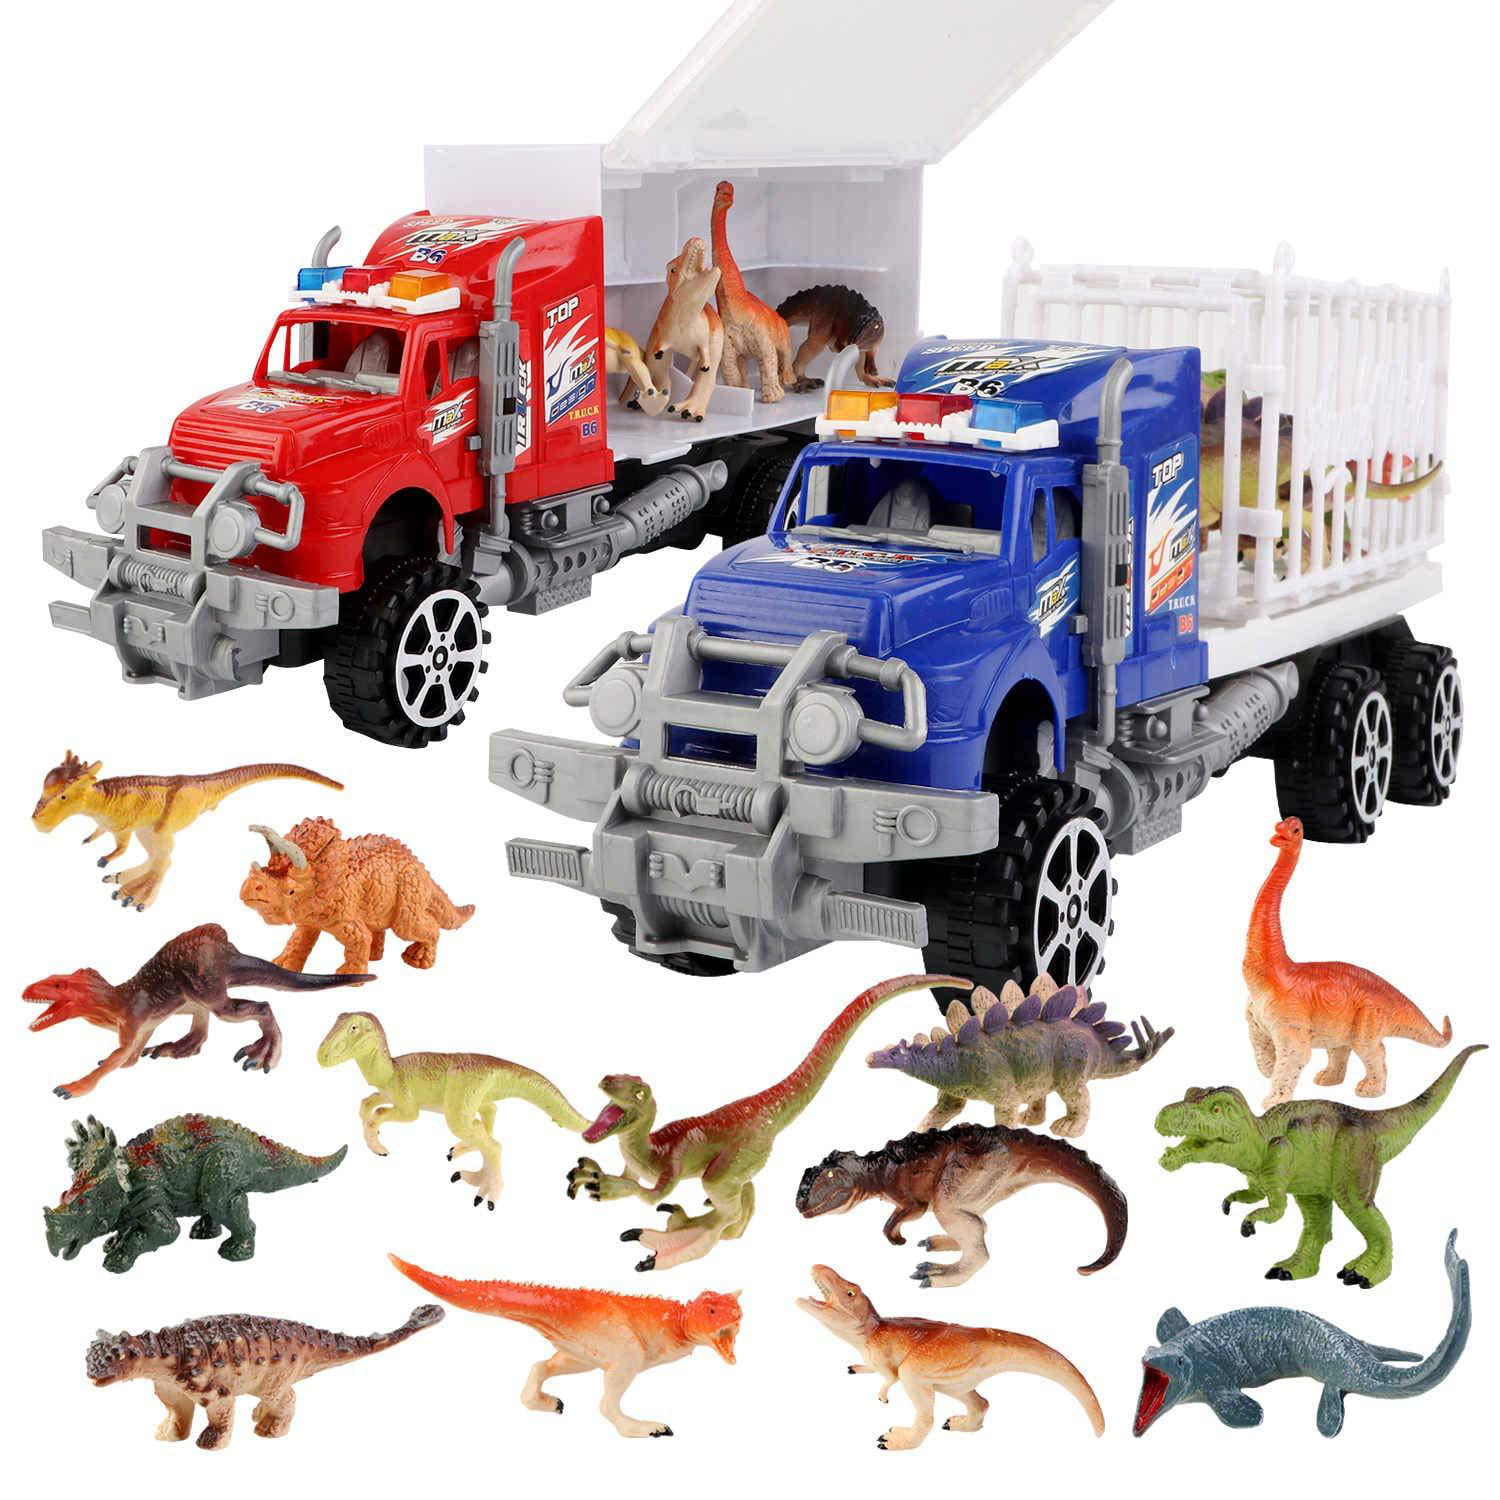 Dinosaur Toys with Truck Carrier Jurassic World Dinosaur Toys with 6 Dinosaurs 6 Animals and Double Sides Storage Truck Car Toys Jurassic Dinosaur Toys Gift for 3 4 5 6 7 Years Old Boys Girls